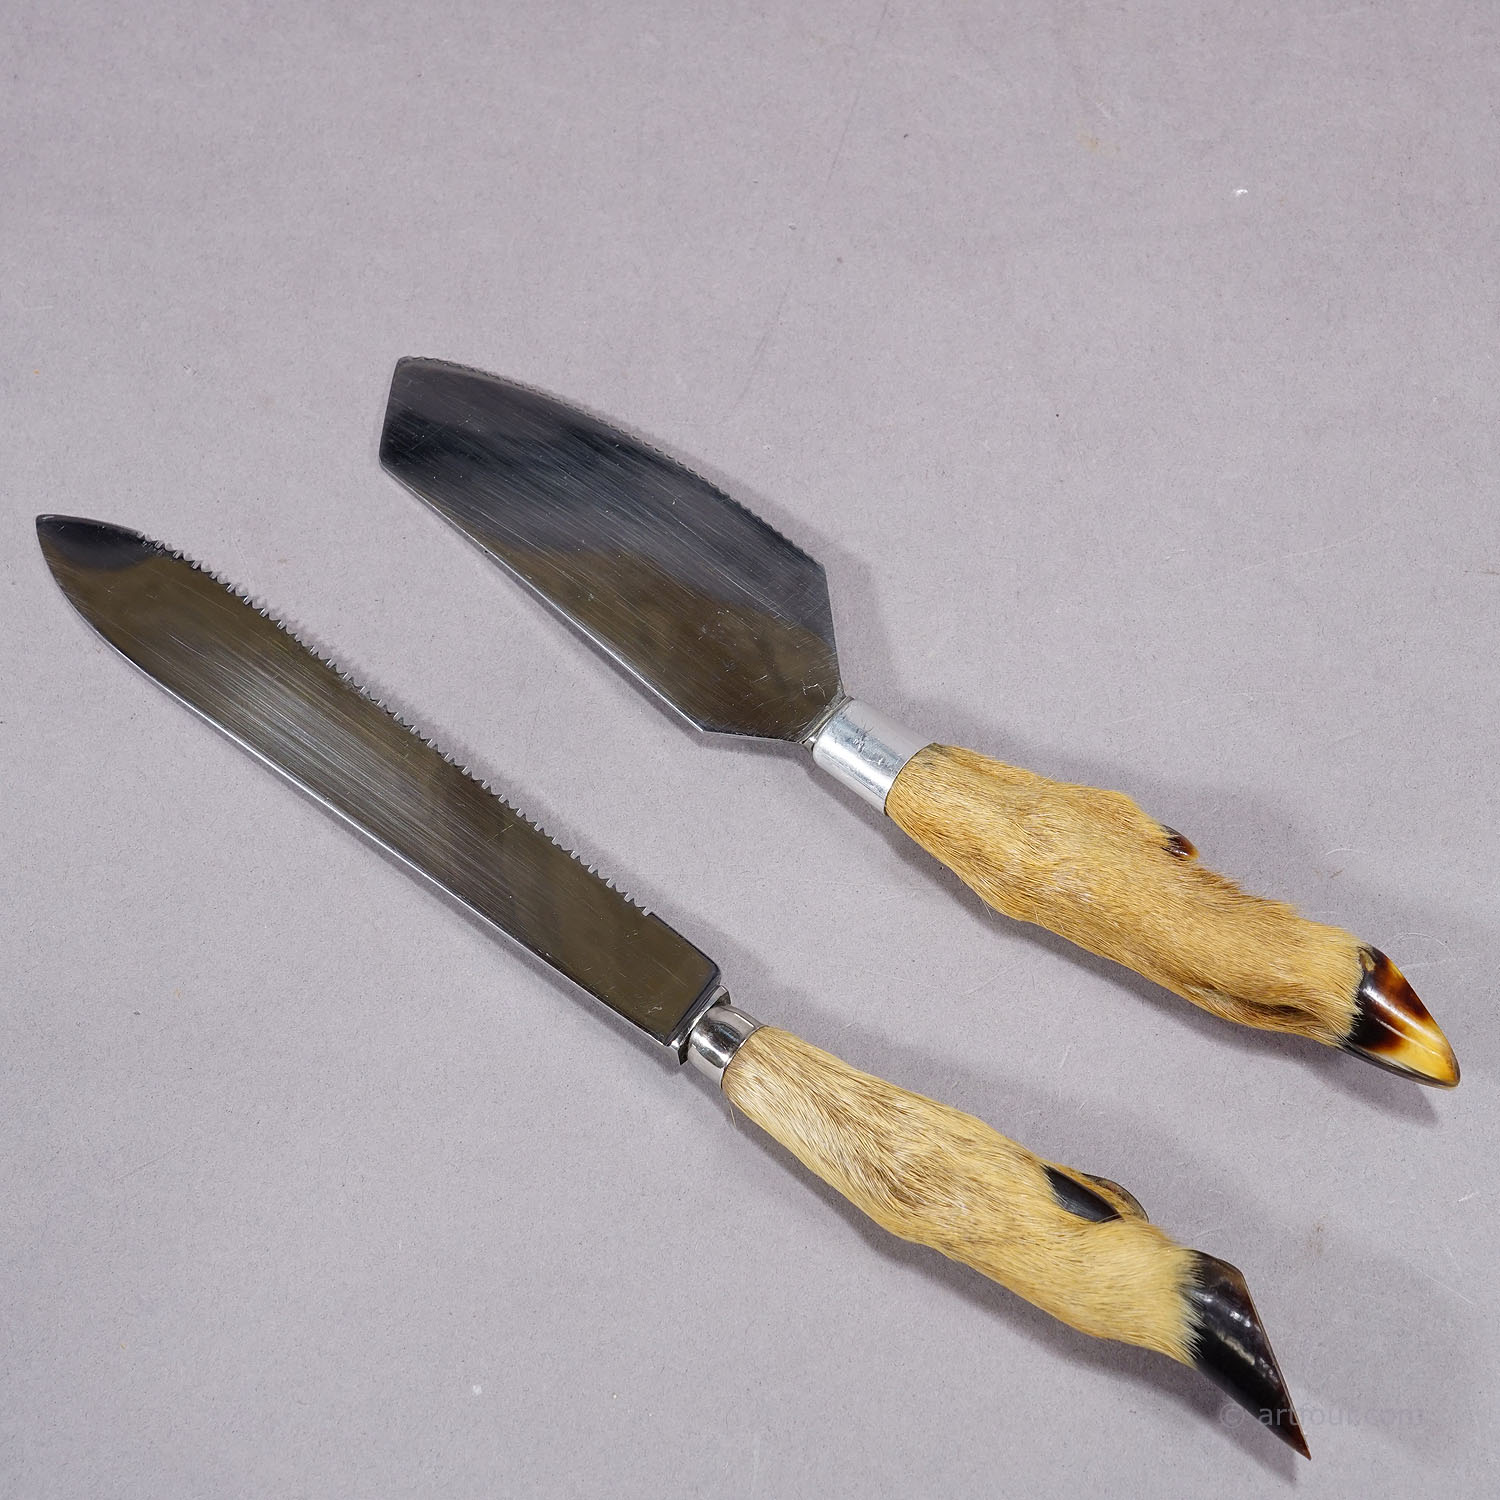 Antique Cheese and Butter Knives with Deer Handles, circa 1950s